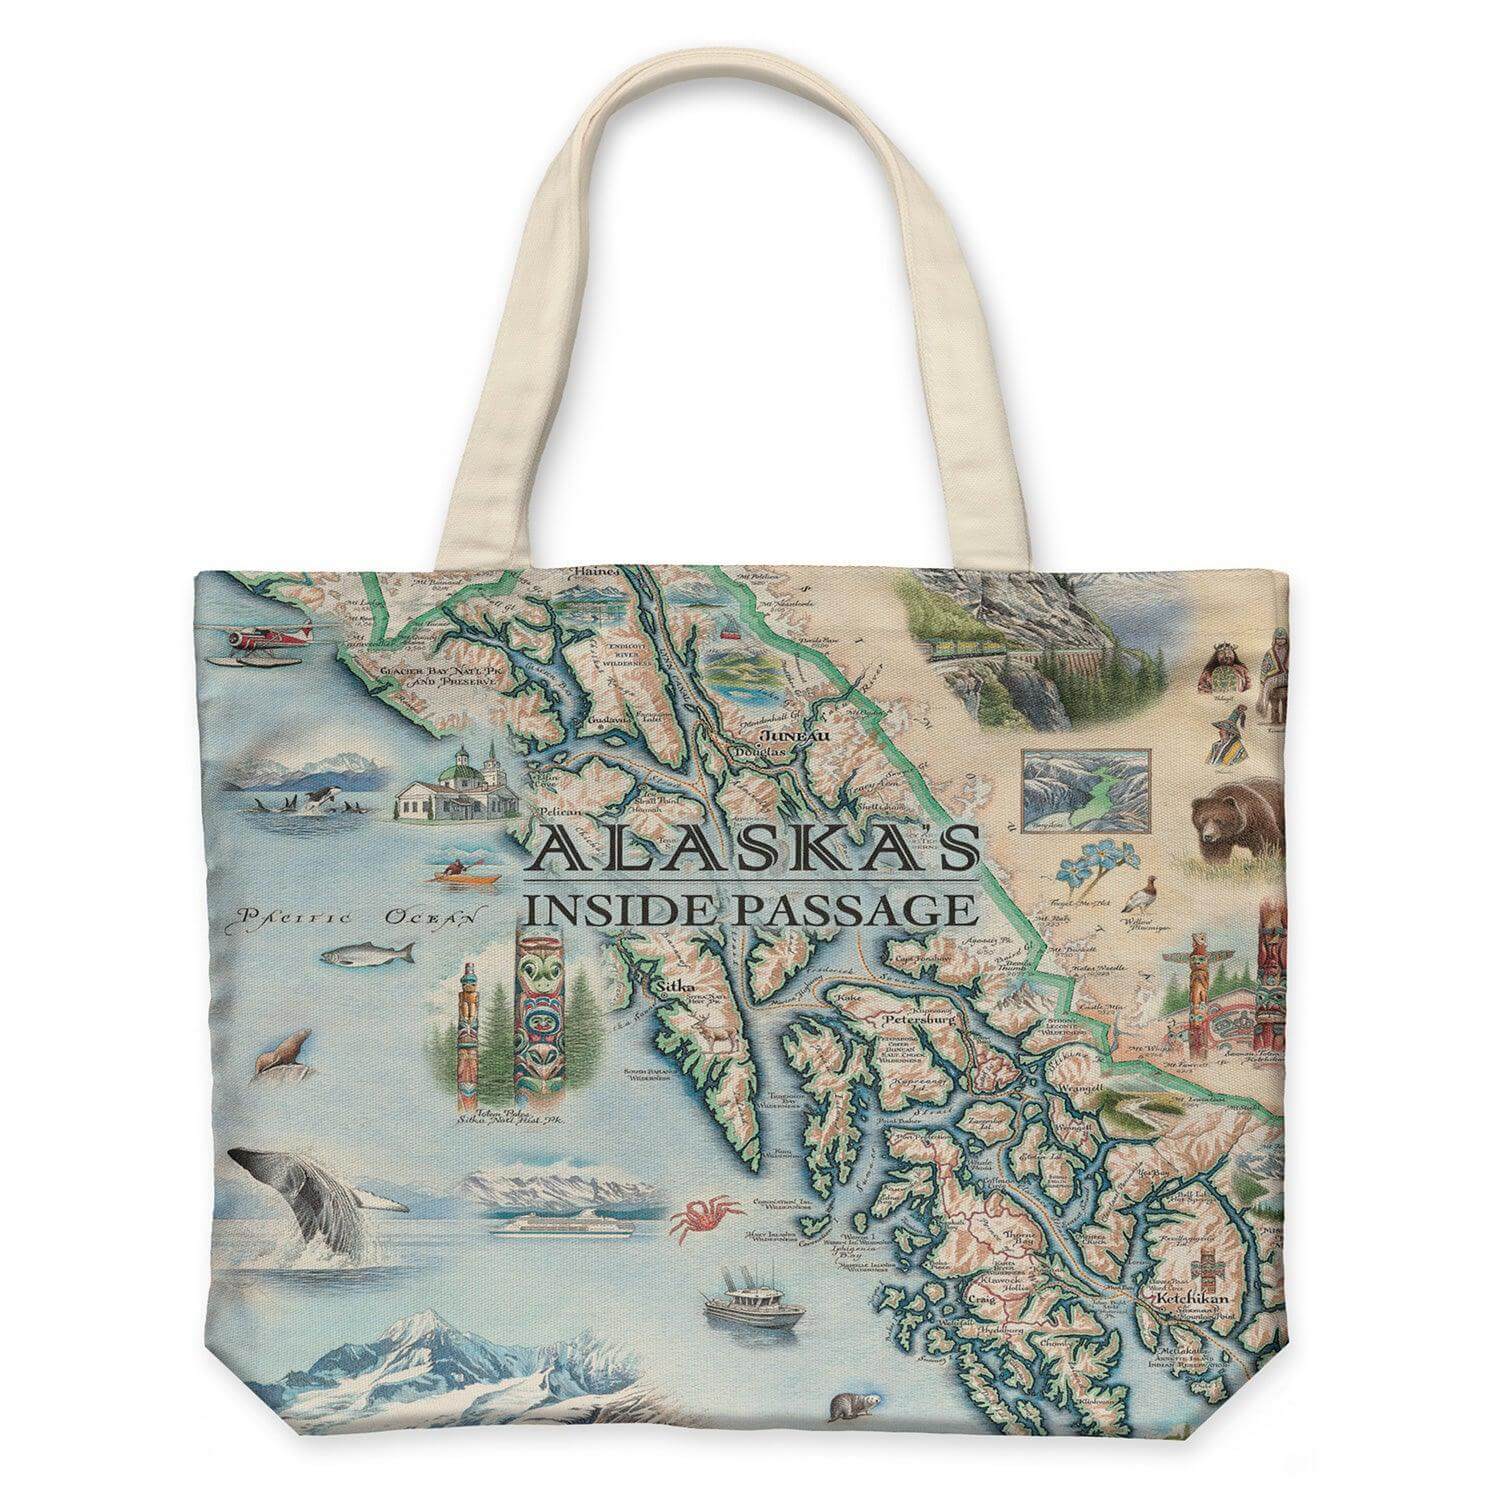 Alaska's Inside Passage Map Canvas Tote Bags by Xplorer Maps. The map features totem poles of native peoples, bears, whales, fish, mountain goats & sheep. Flora is an illustration of forget-me-nots. Including the towns of Sitka, Juneau, Ketchikan, and others.